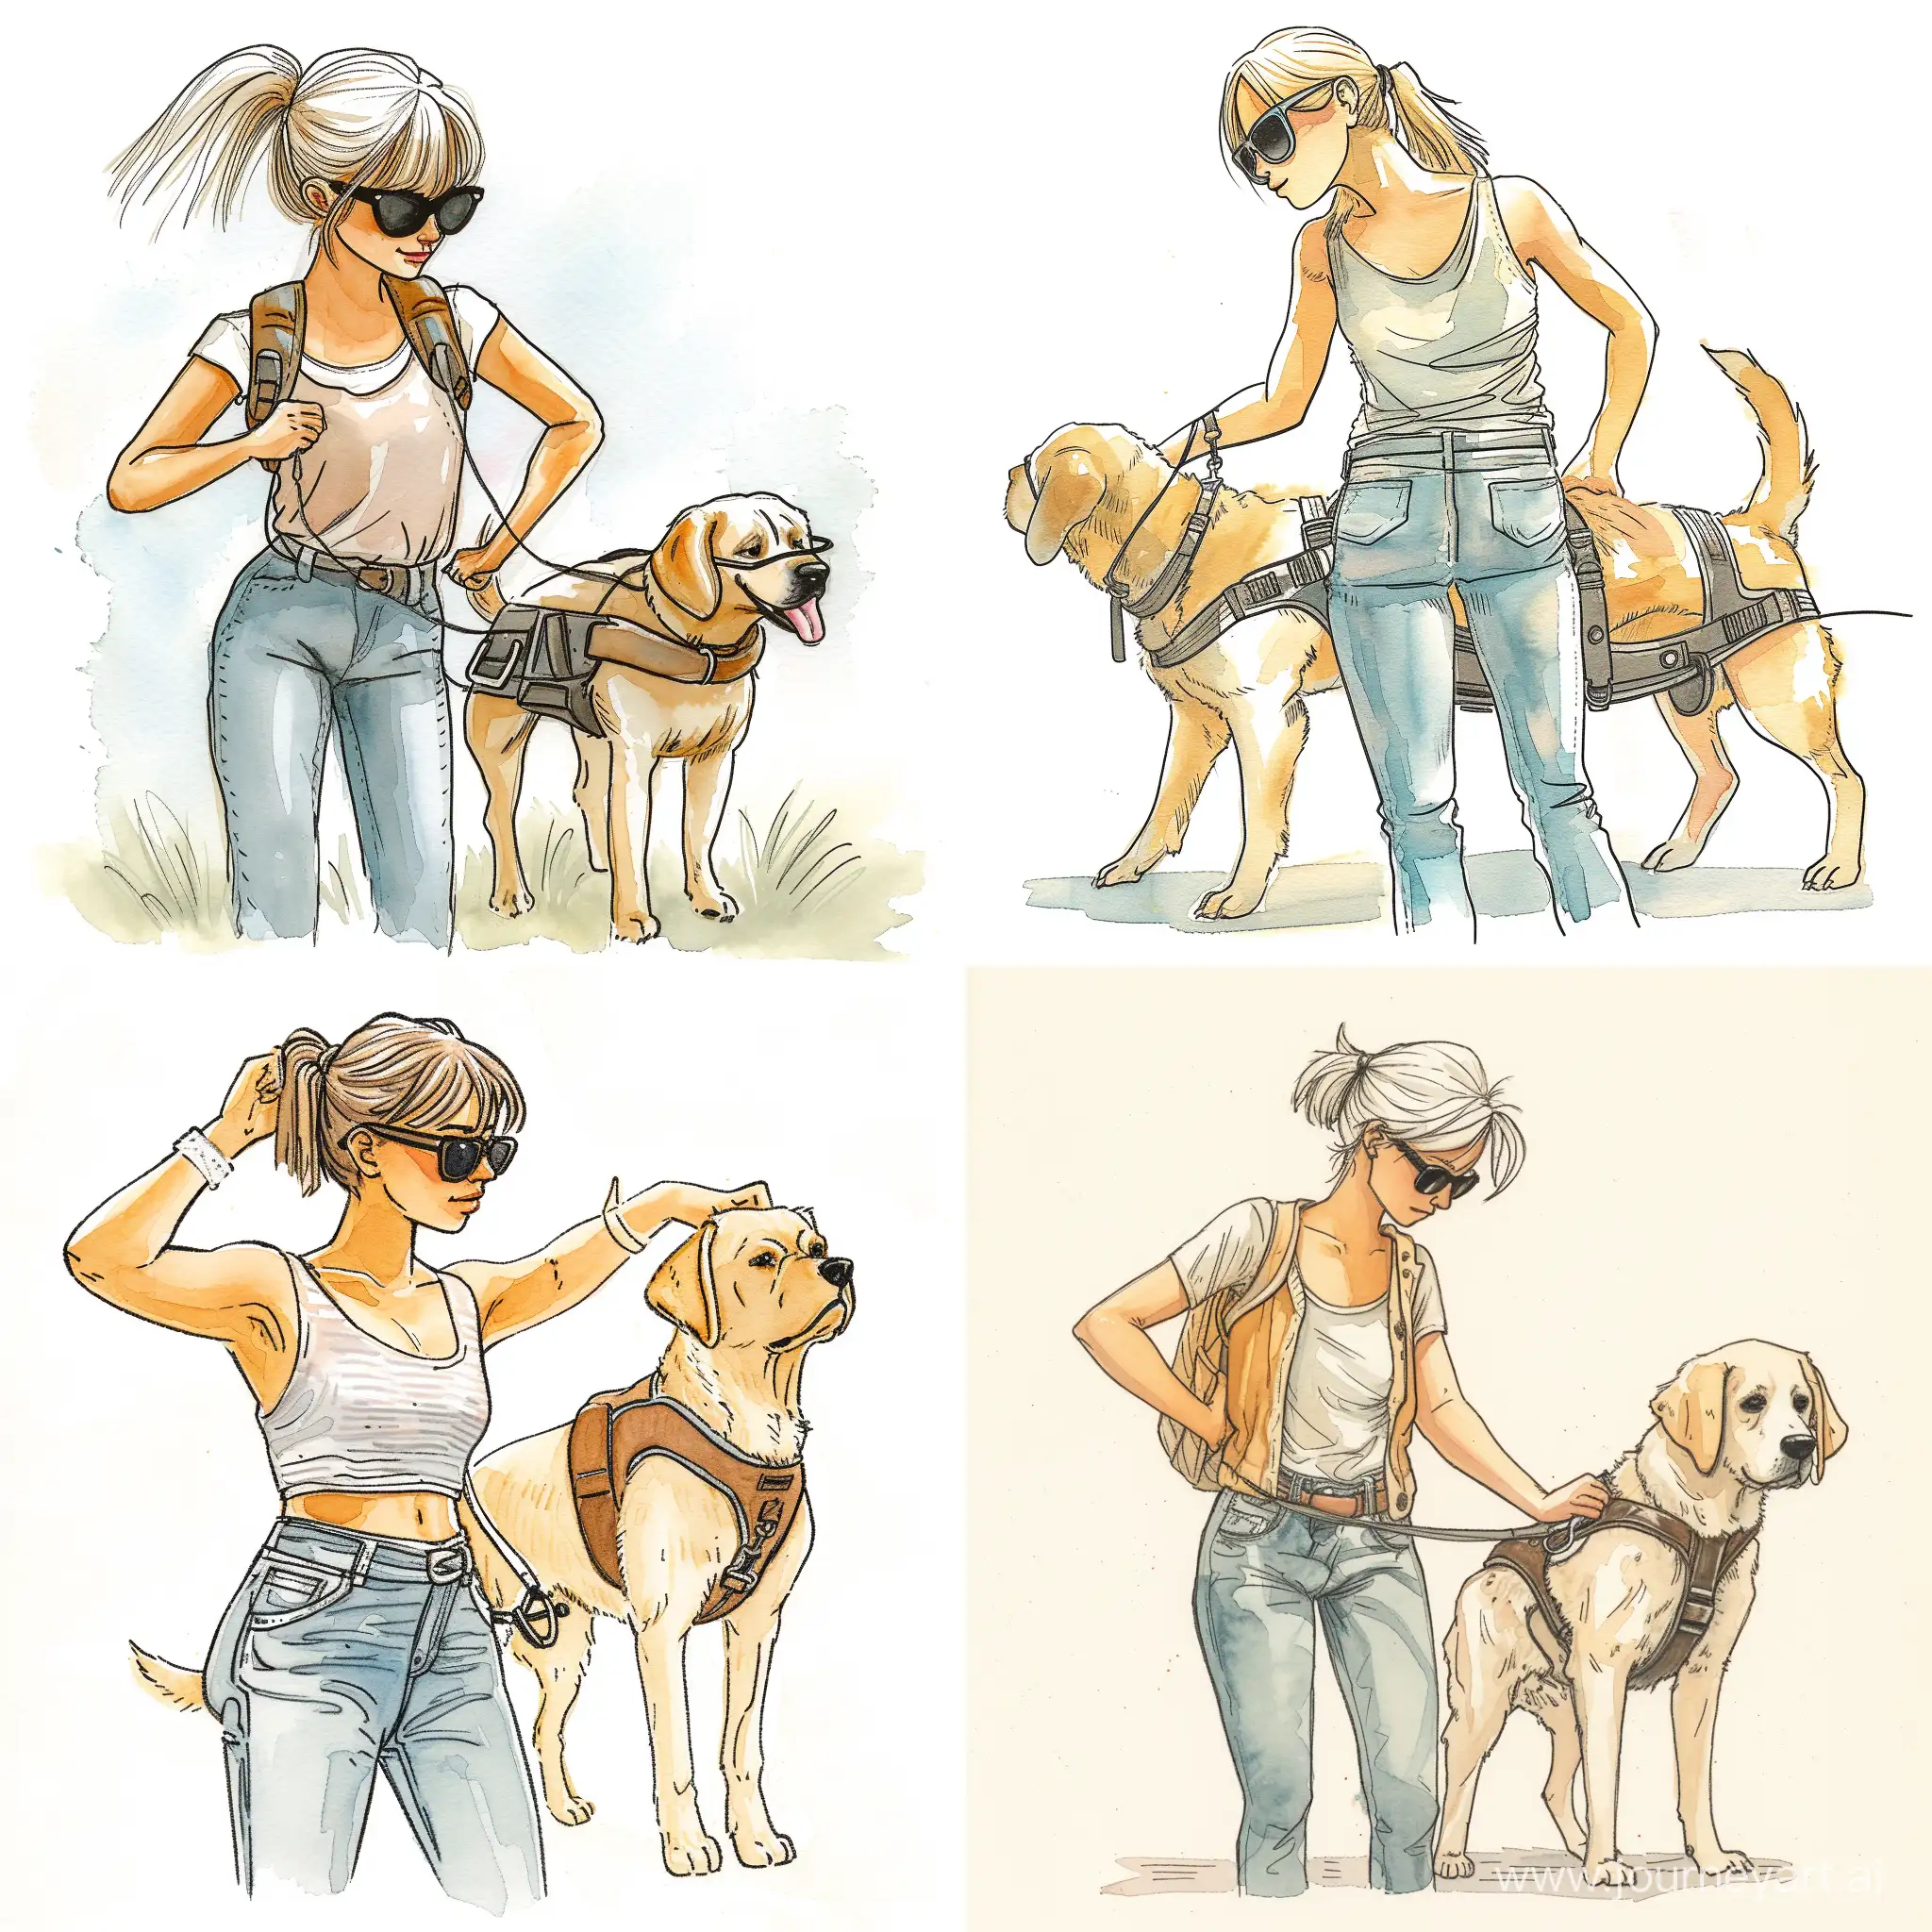 Visually-Impaired-Woman-Preparing-Guide-Dog-for-Outing-in-Watercolor-Childrens-Book-Style